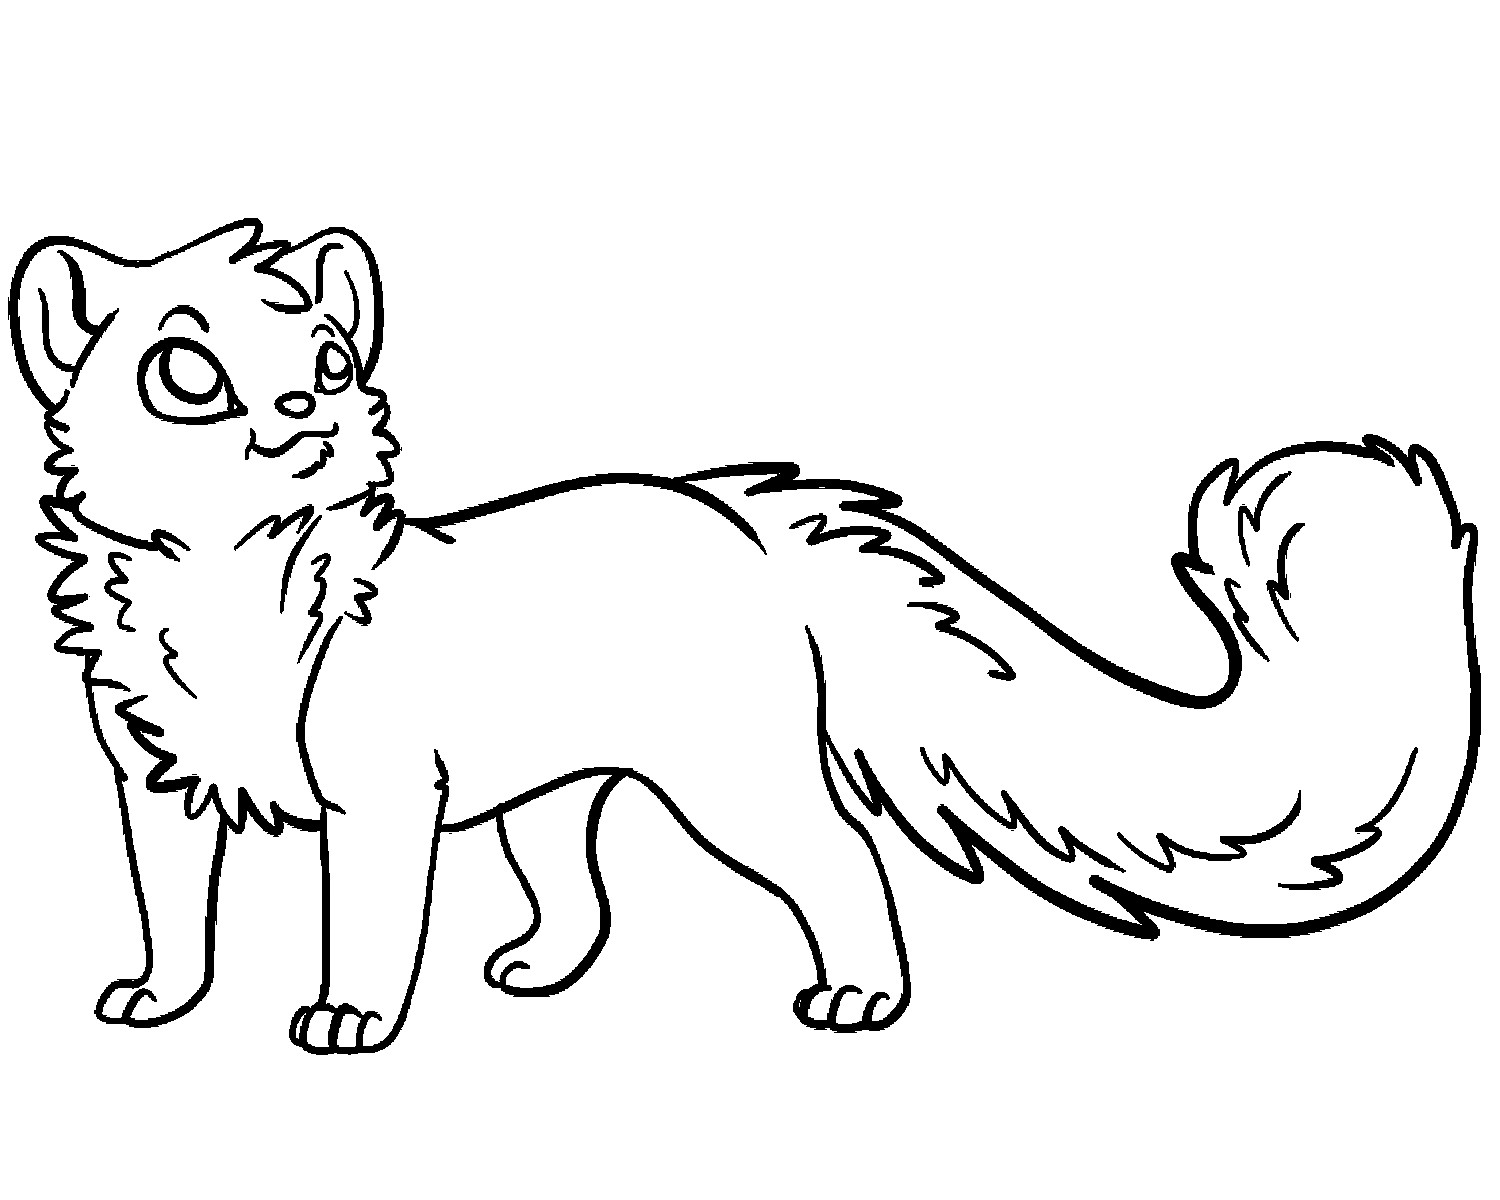 Red Panda Coloring Pages
 Red Panda Coloring Pages